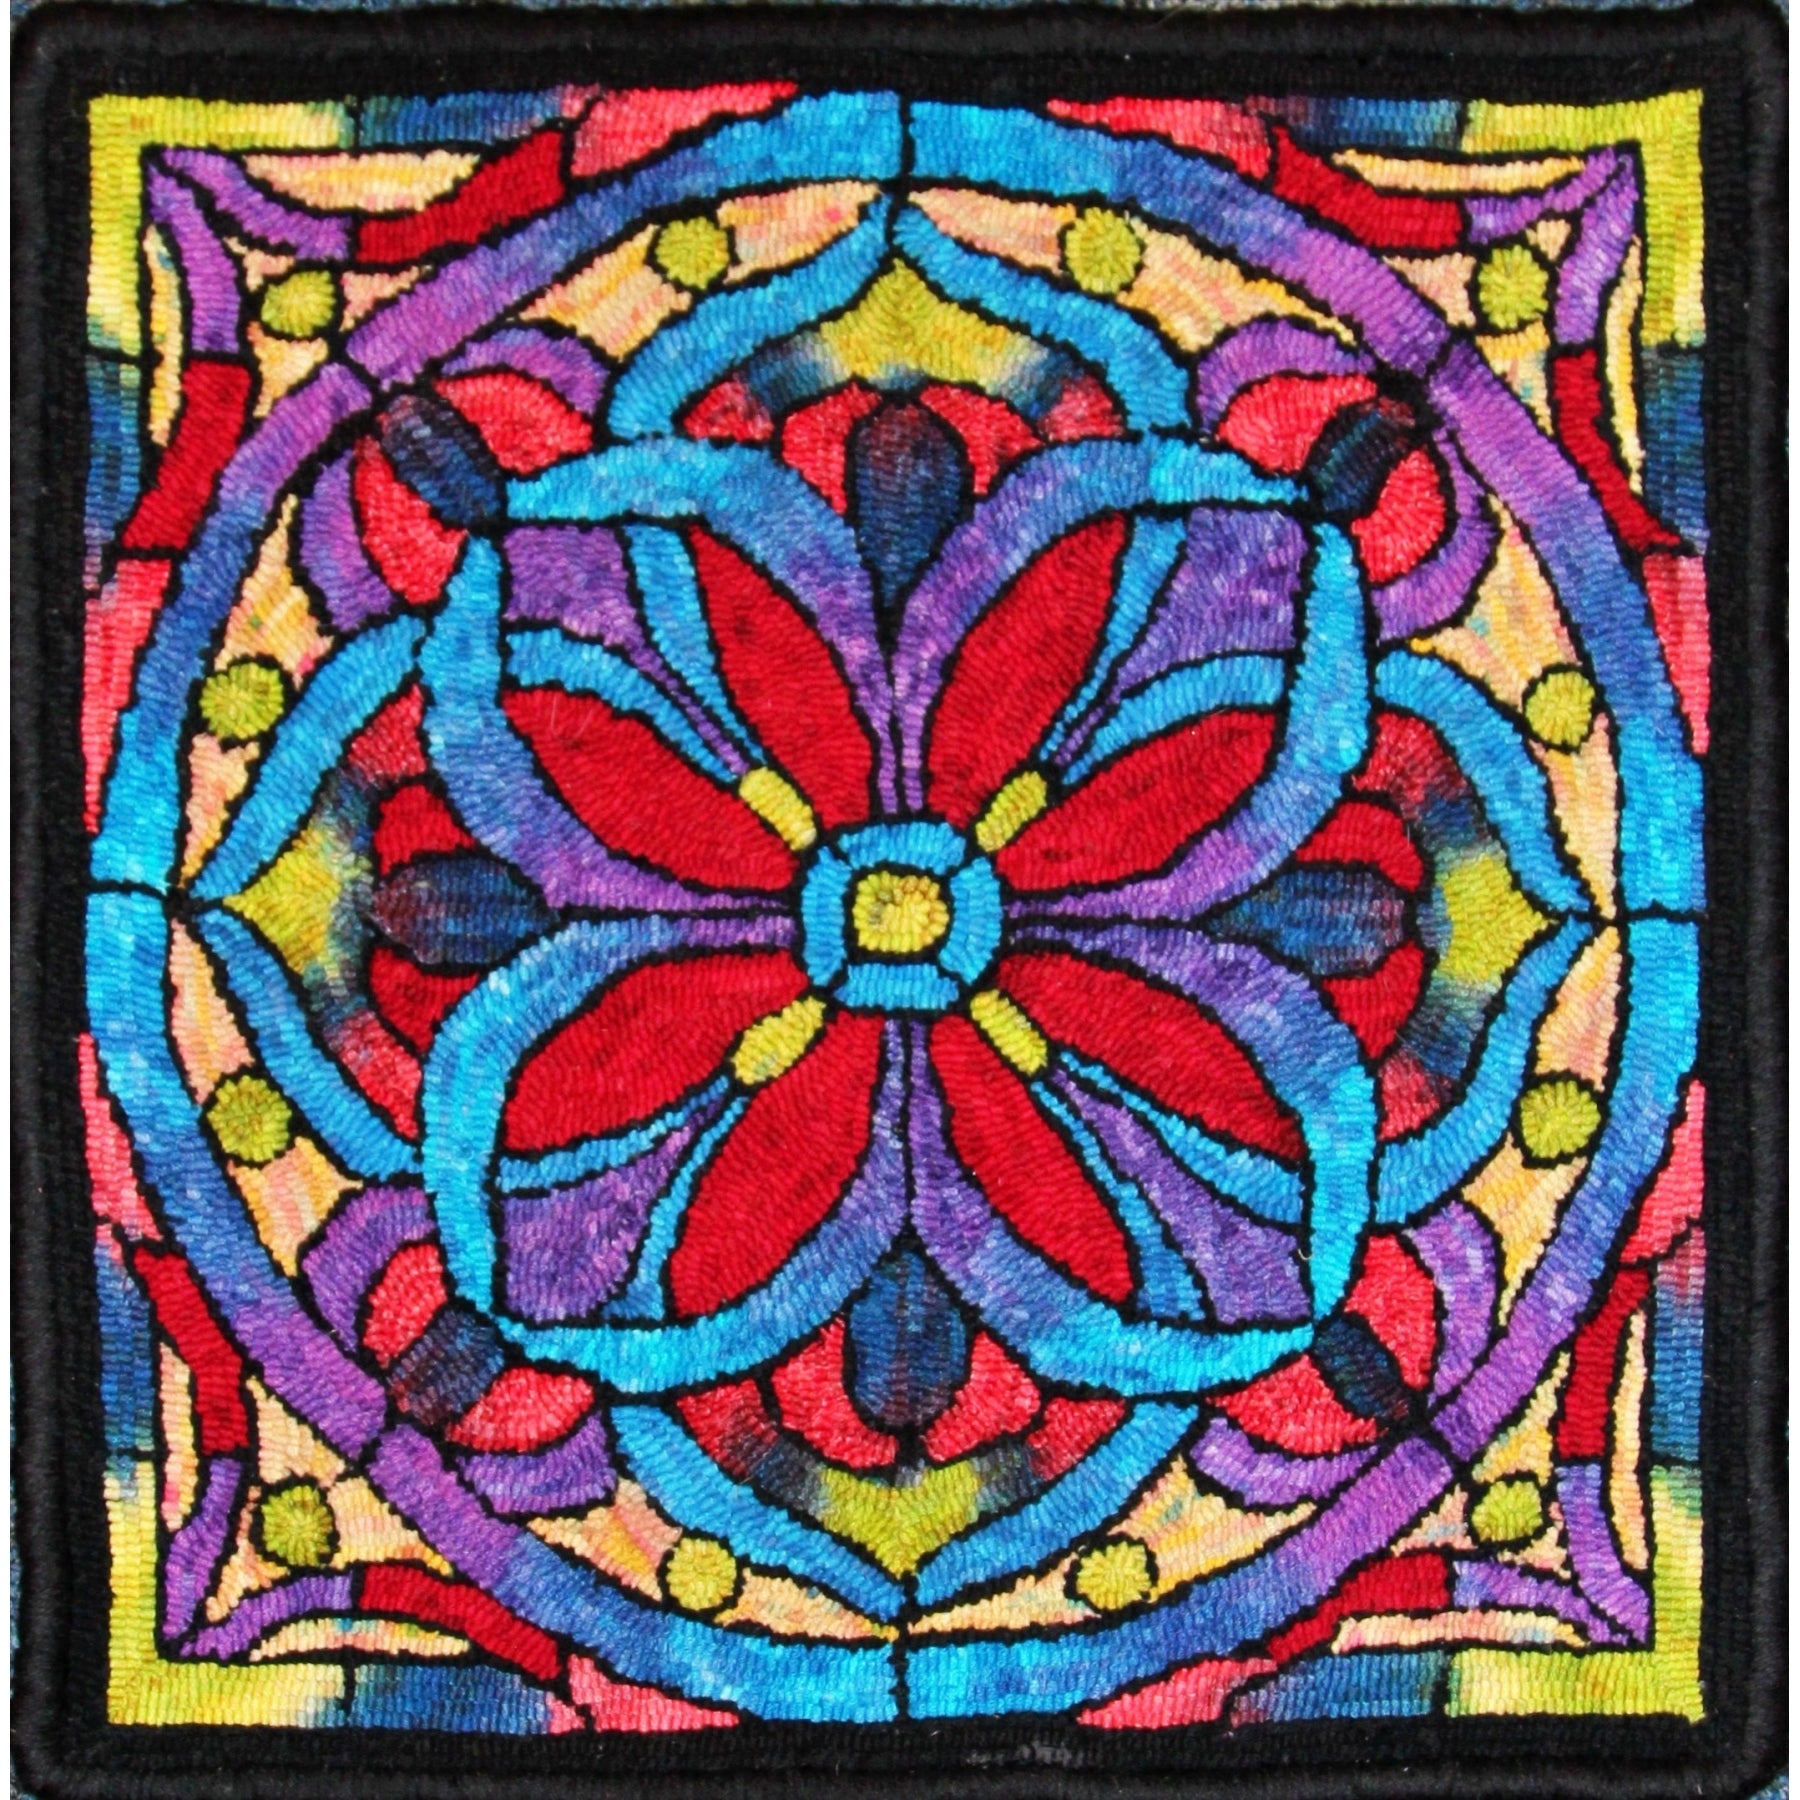 Stained Glass Mosaic, rug hooked by Lori Rokusek